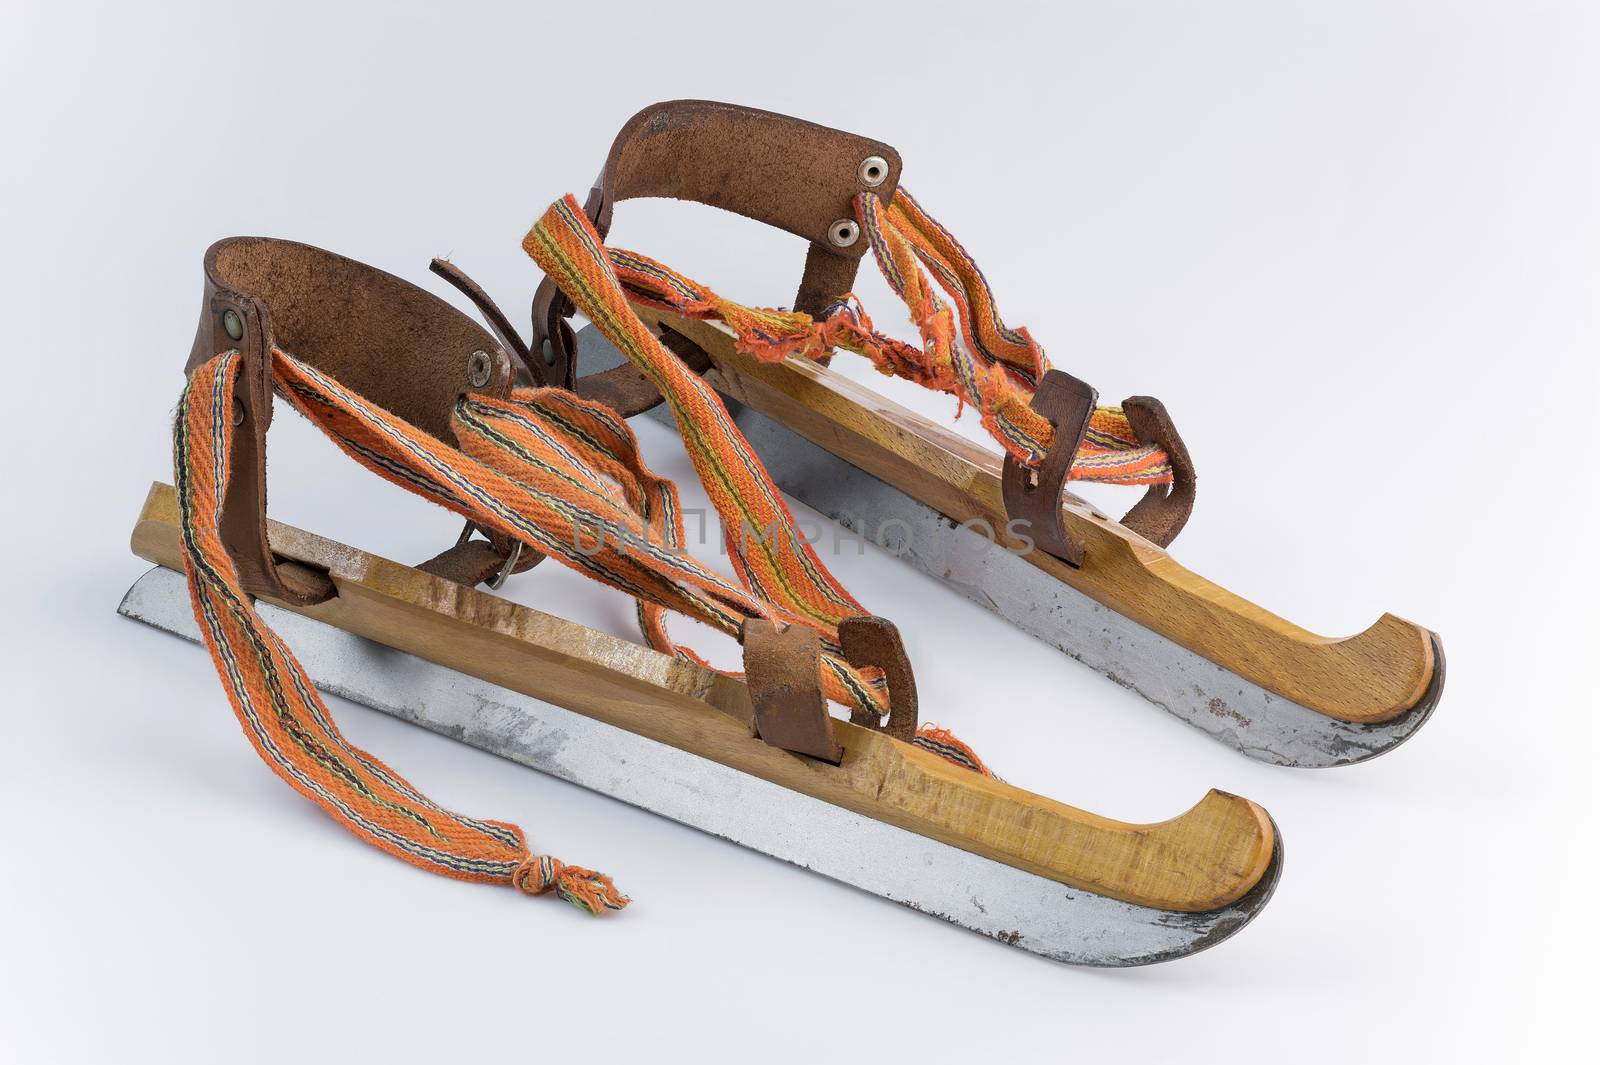 Authentic old wooden ice skating called Friese Doorlopers from the Netherlands
